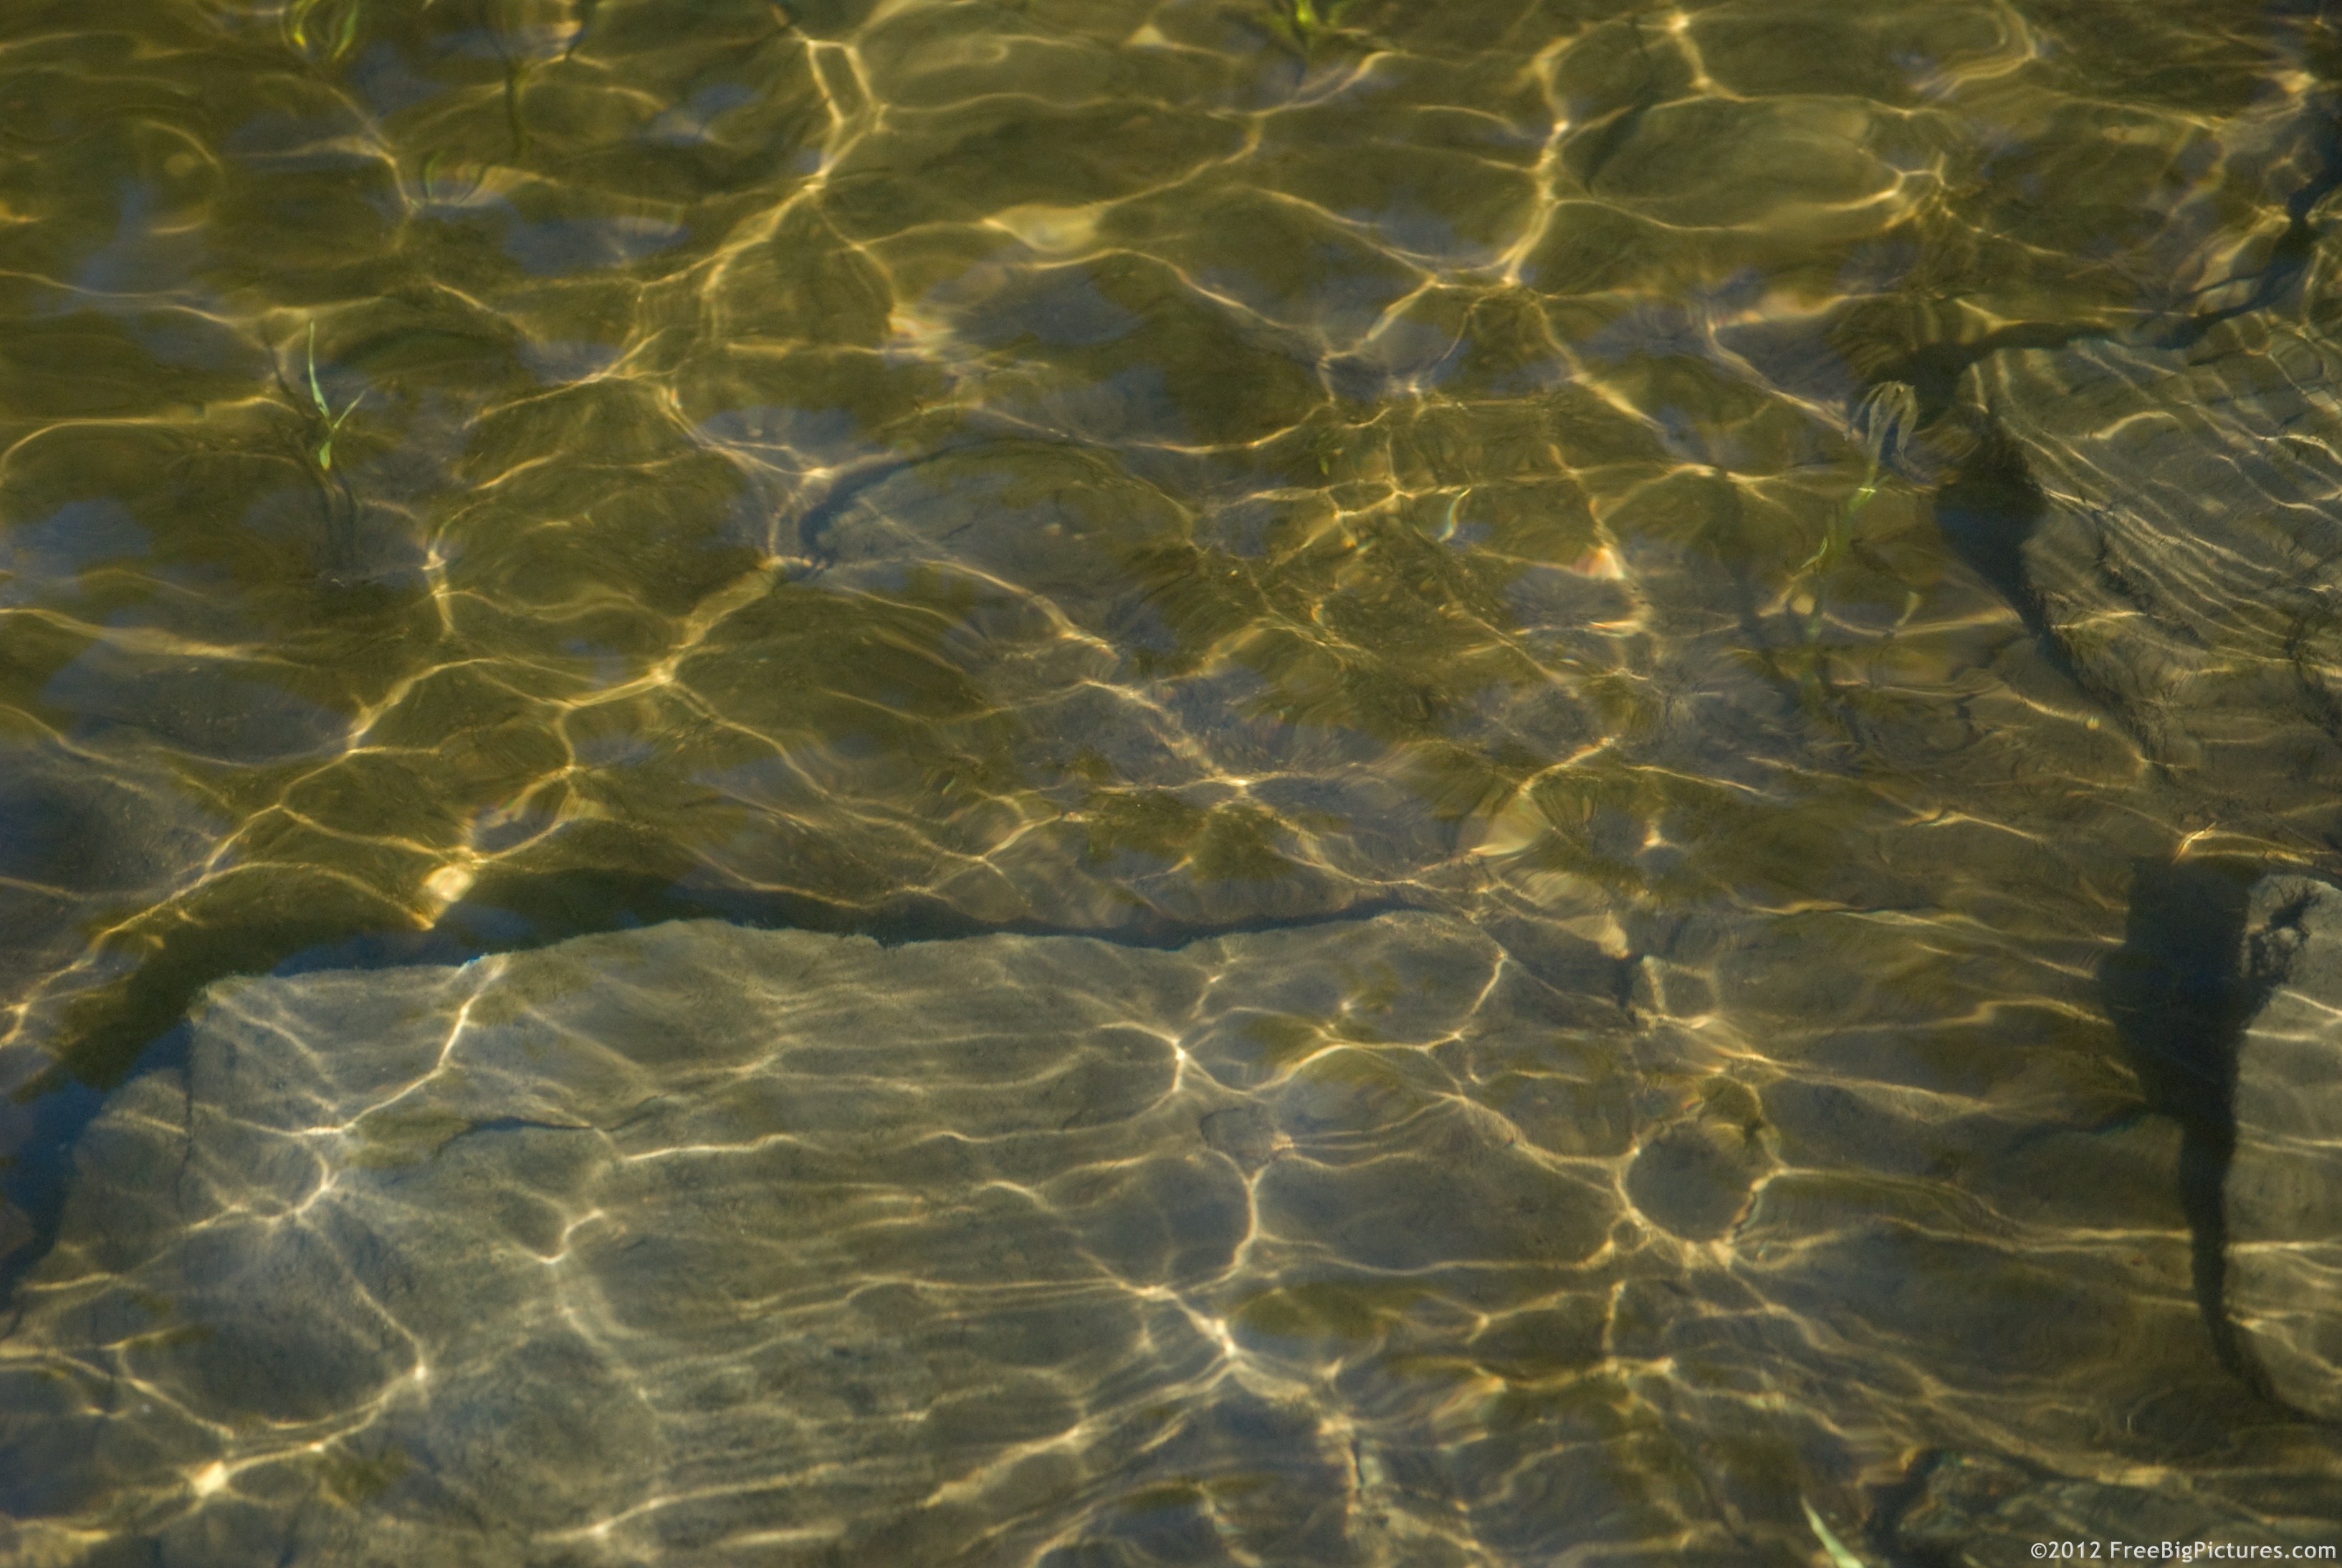 Underwater reflections of an irregular water surface